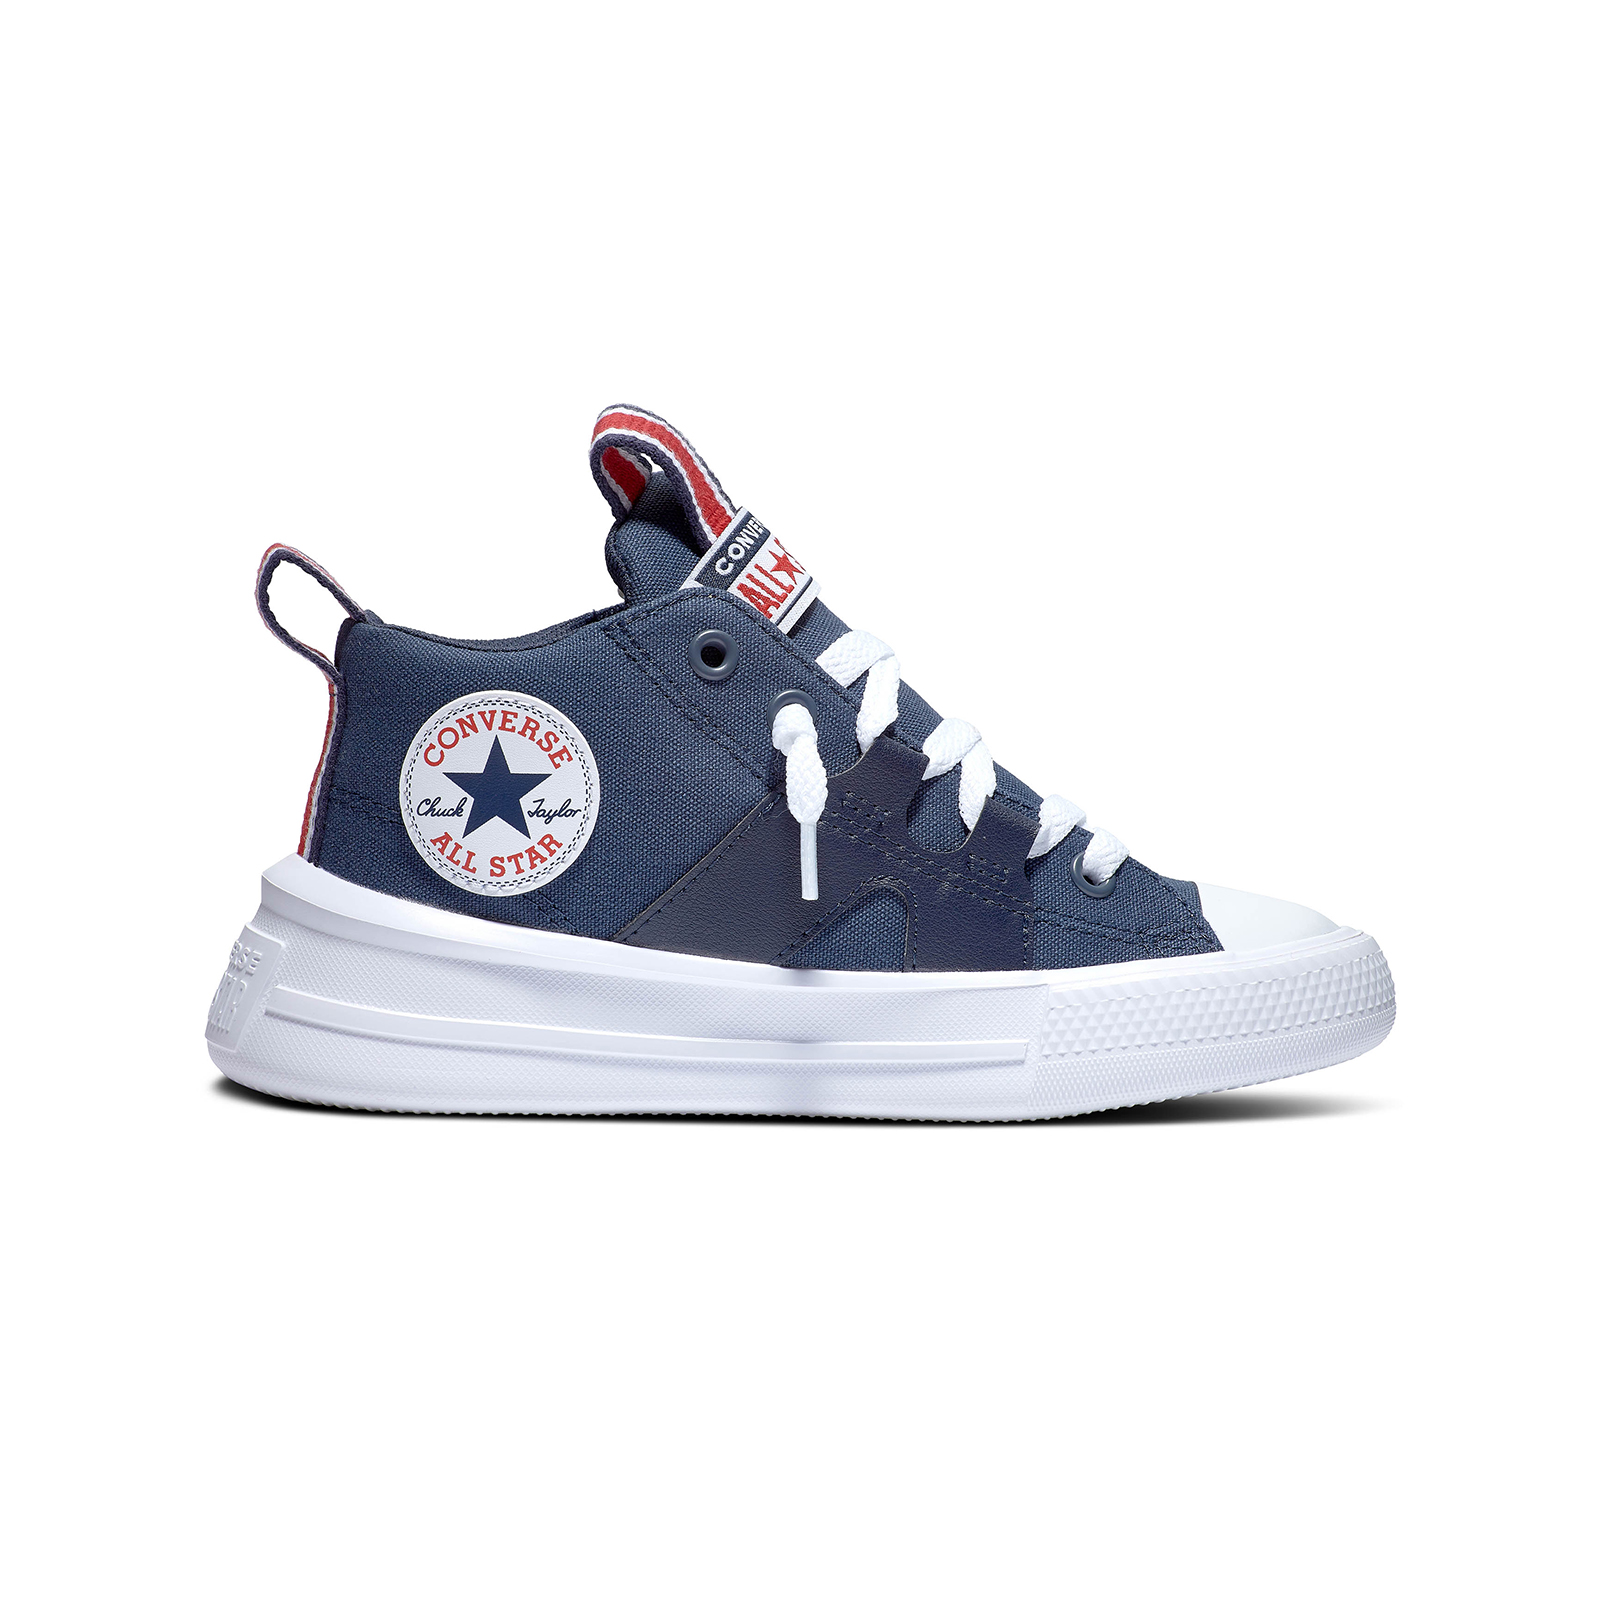 Converse - CHUCK TAYLOR ALL STAR ULTRA - 410-NAVY/WHITE/RED Παιδικά > Παπούτσια > Sneaker > Παπούτσι Mid Cut